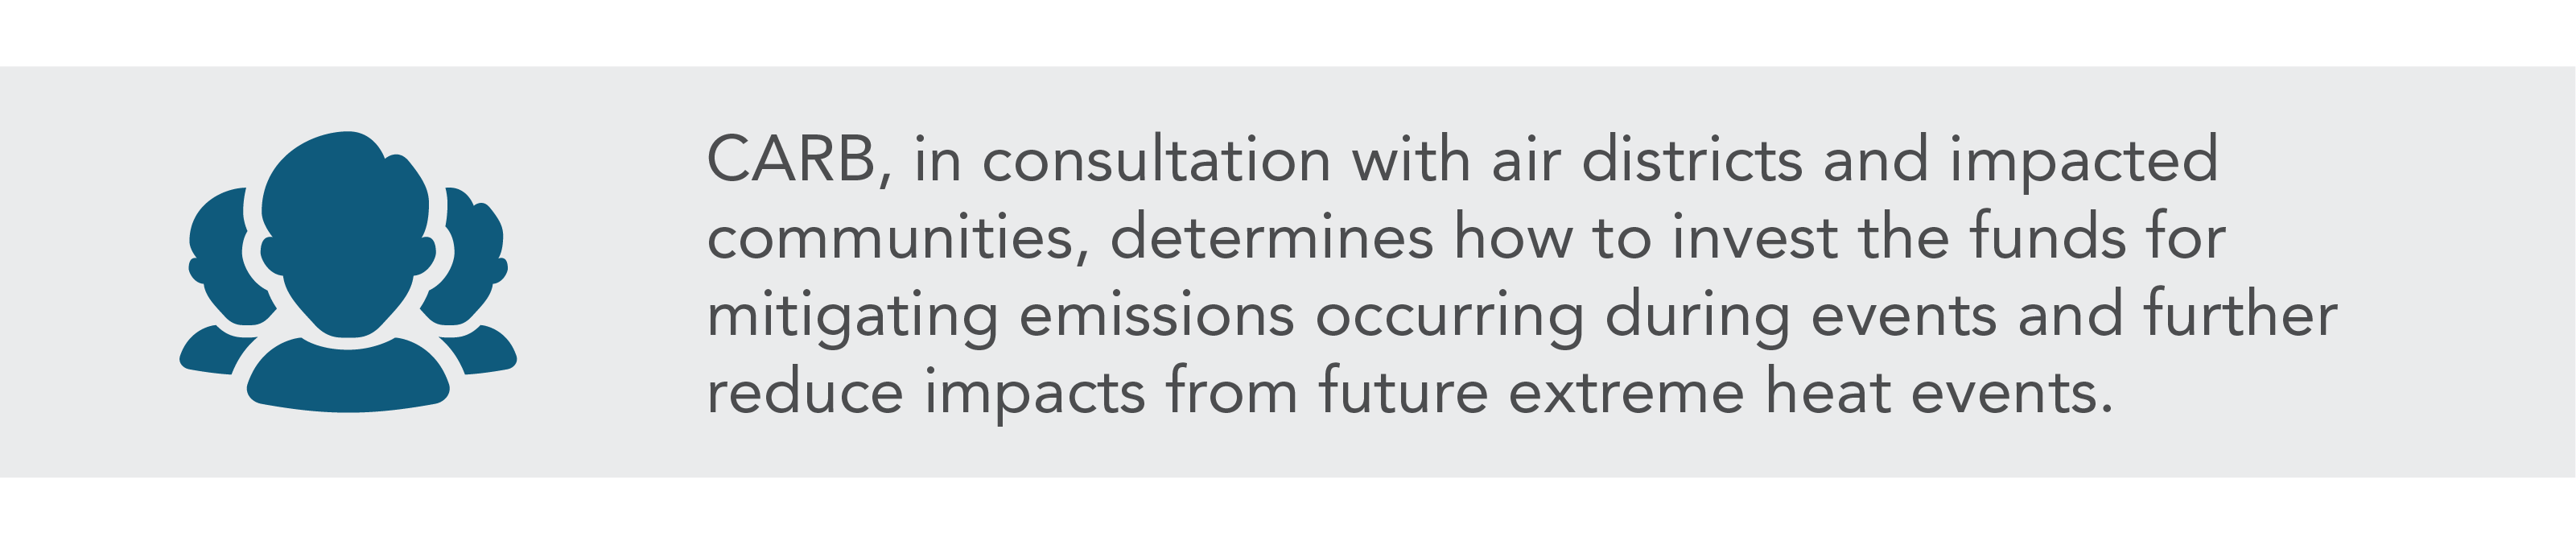 CHIRP step 4 - determine how to invest funds.  CARB, in consultation with air districts and impacted communities, determines how to invest the funds for mitigating emissions occurring during events and further reduce impacts from future extreme heat events.